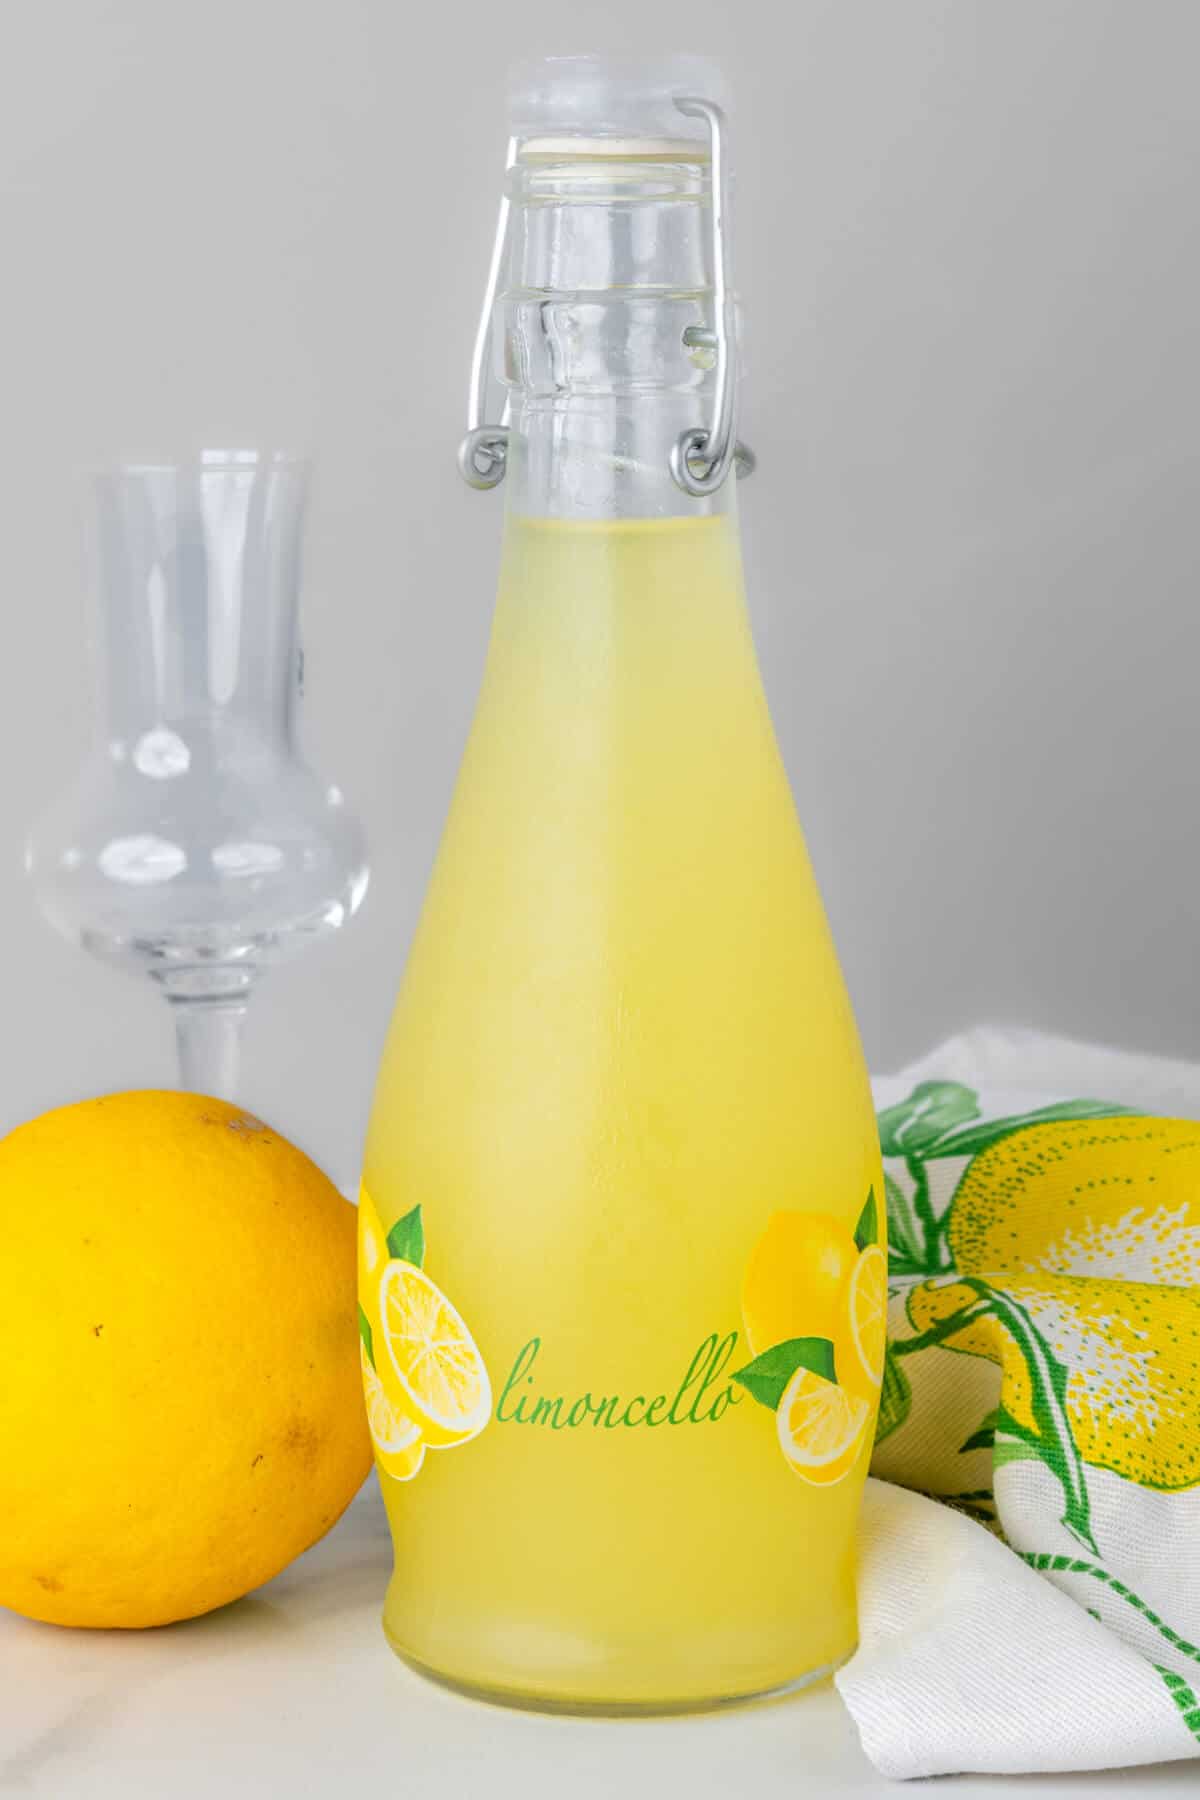 Bottle of limoncello with a glass and lemon in shot